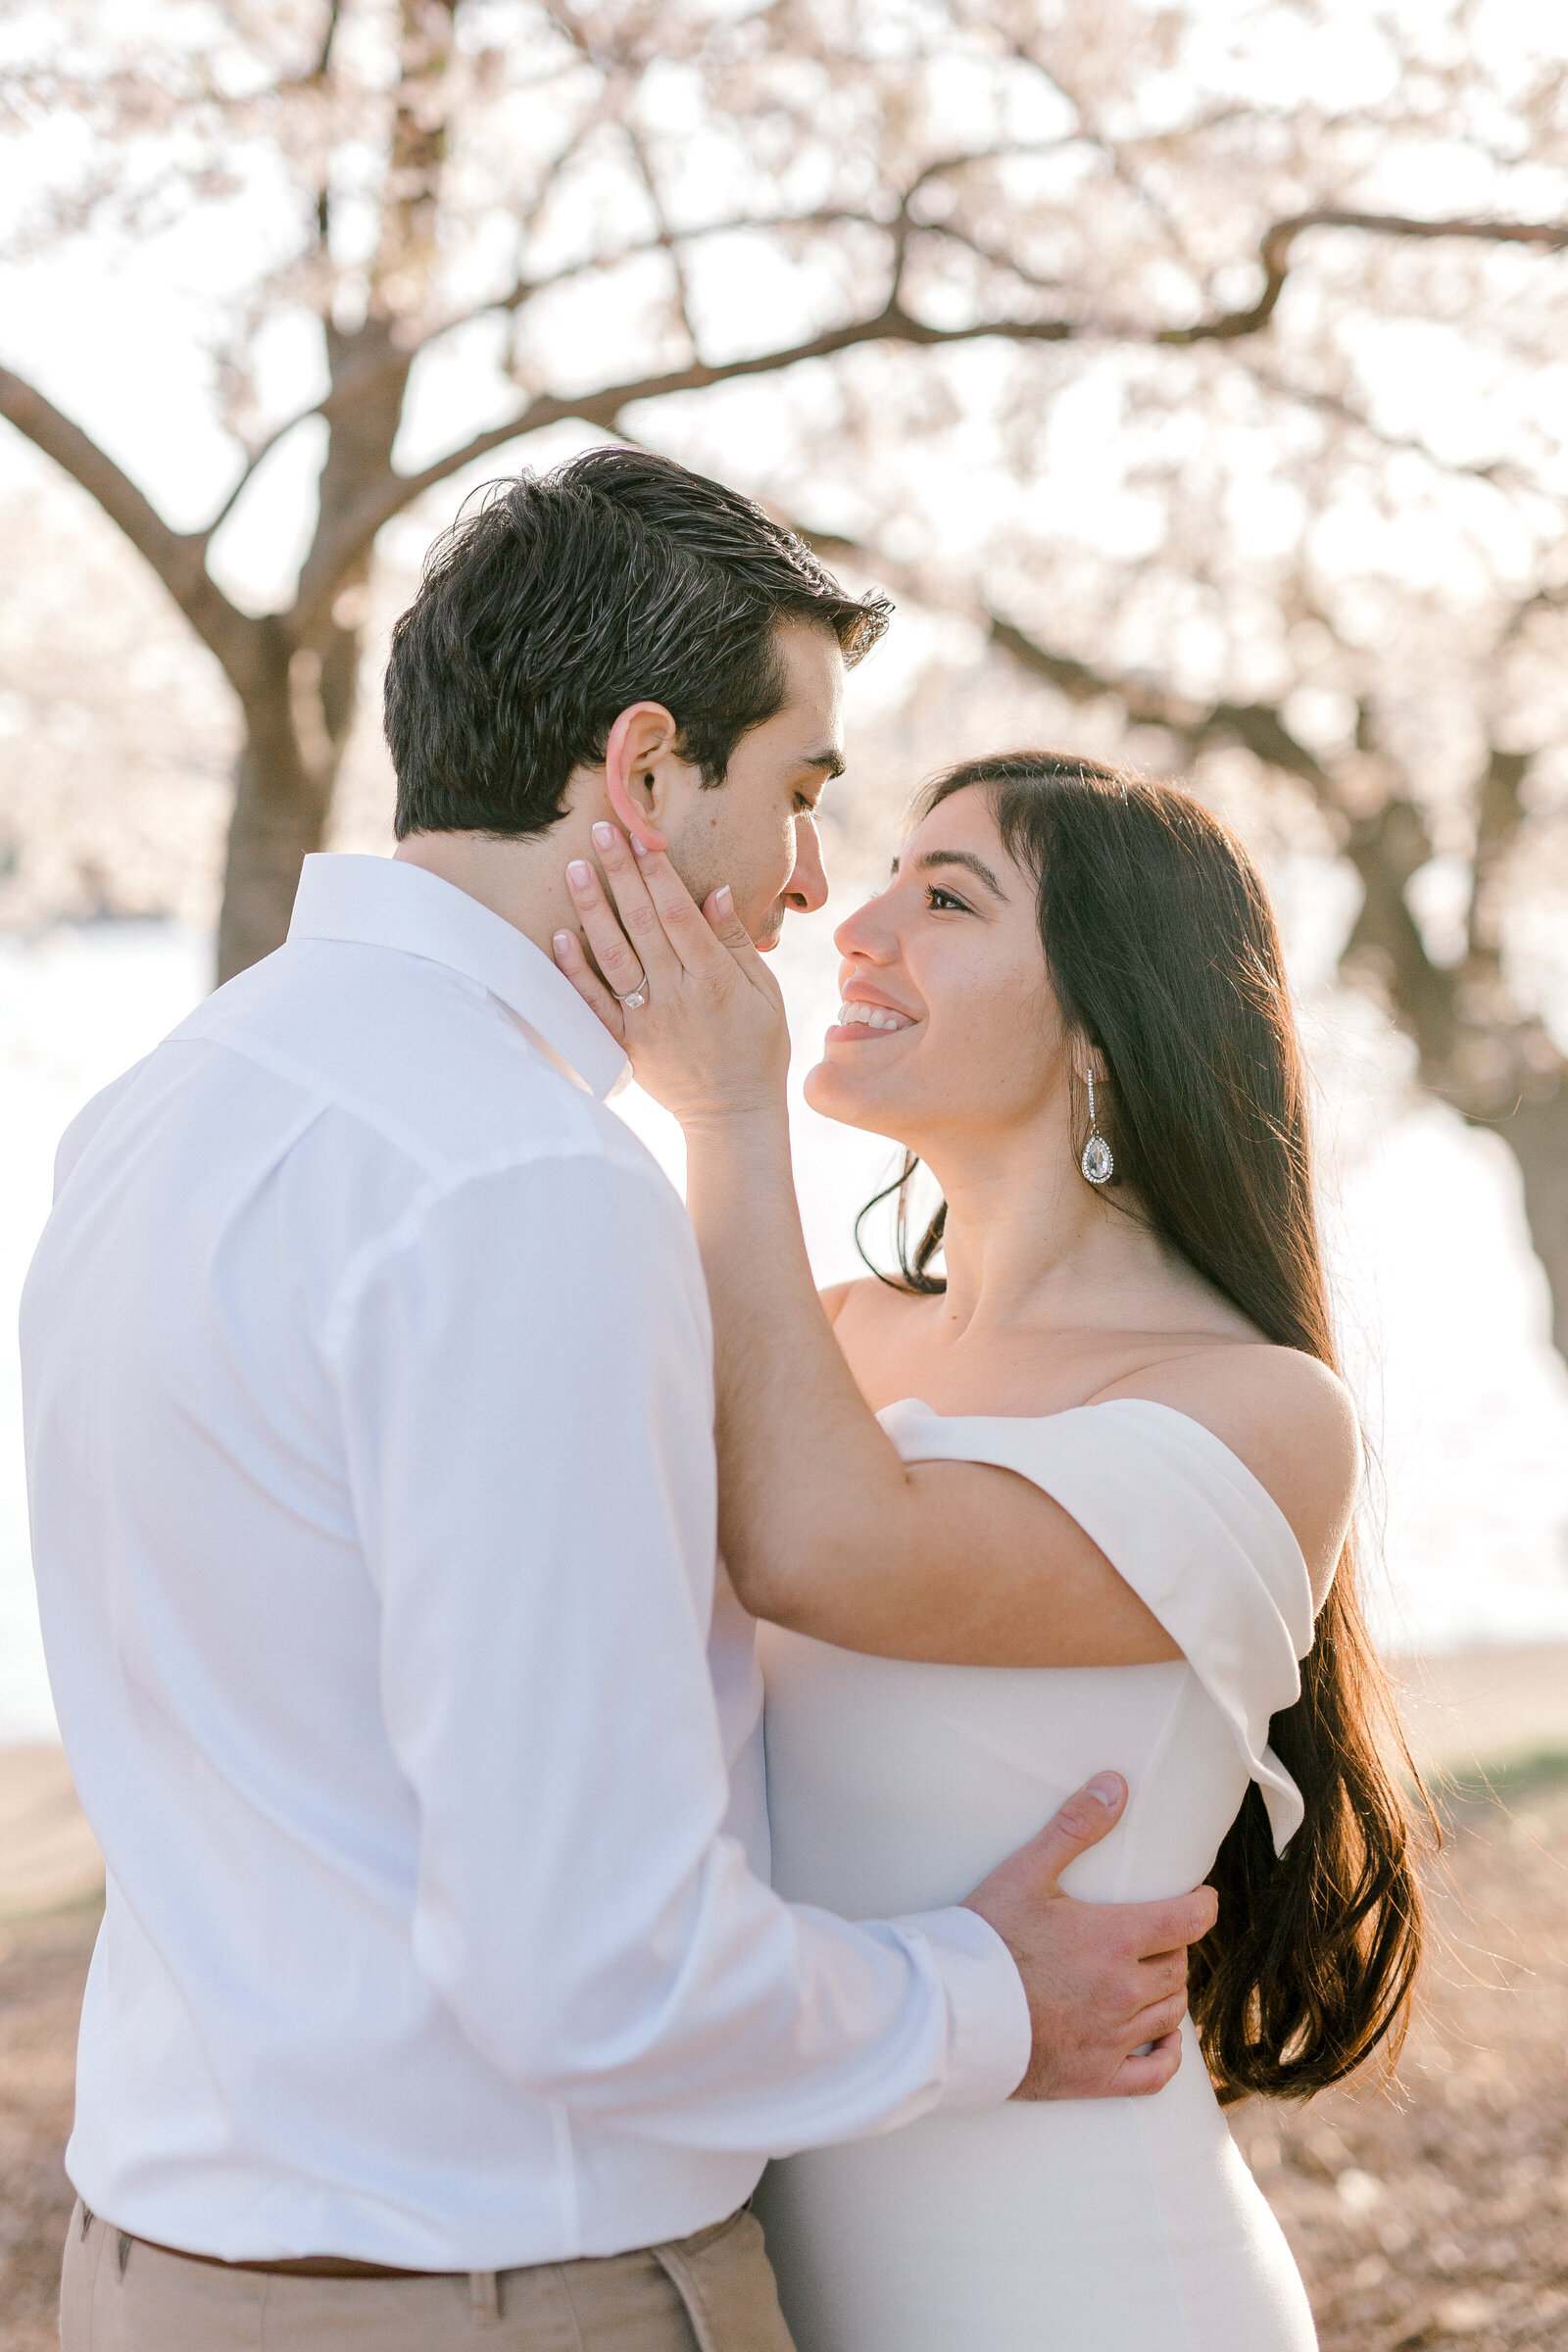 Cherry blossom engagement session in Washington DC